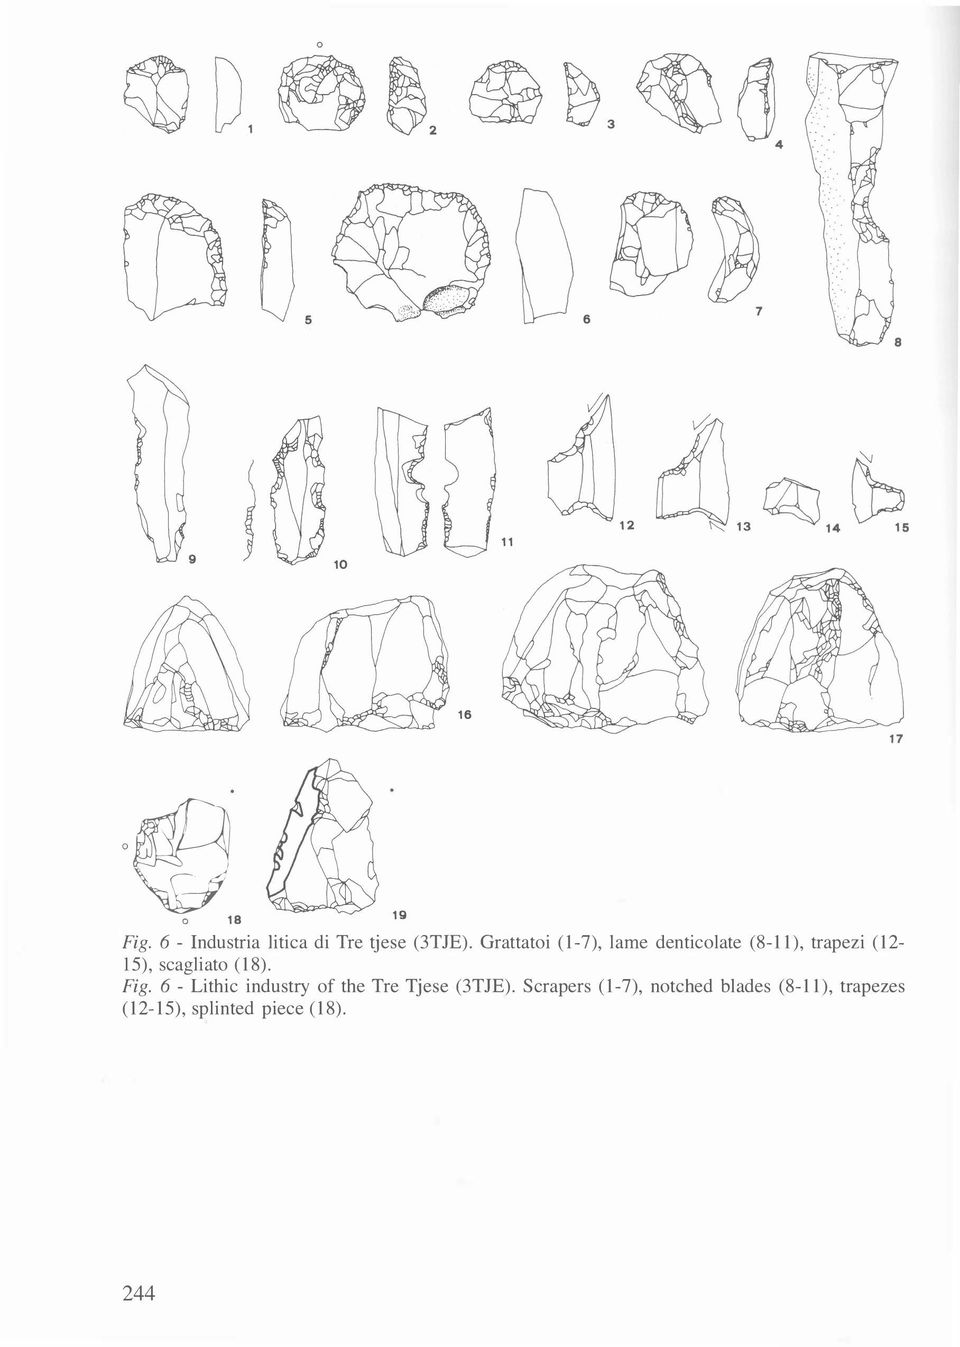 scagliato (18). Fig. 6- Lithic industry of the Tre Tjese (3TJE).